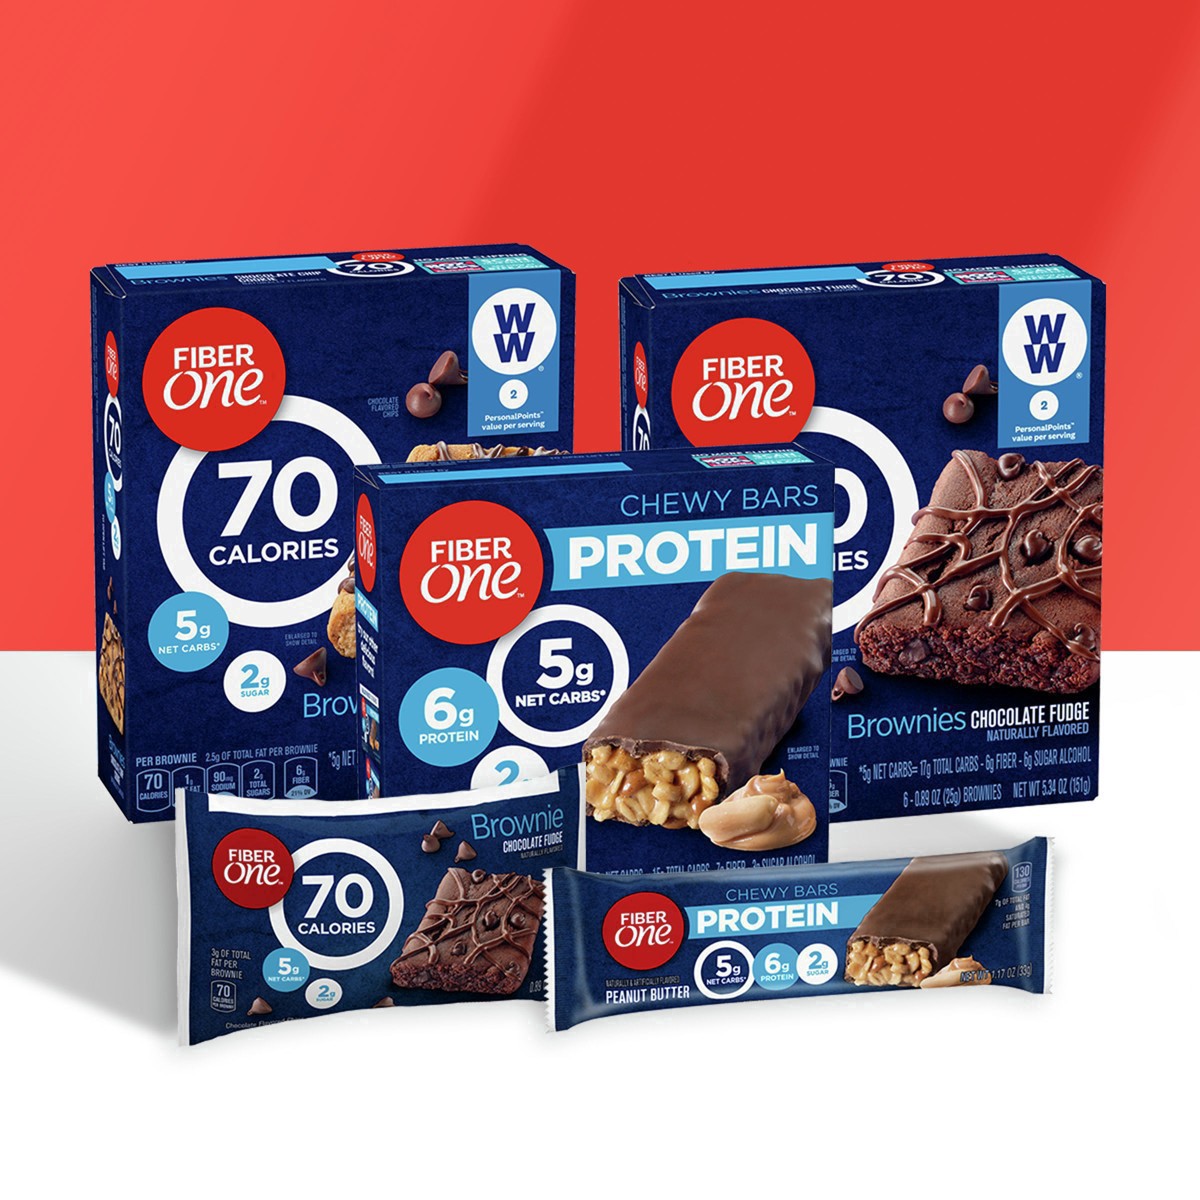 slide 39 of 89, Fiber One 70 Calorie Brownies, Chocolate Chip Cookie, Snack Bars, 6 ct, 6 ct